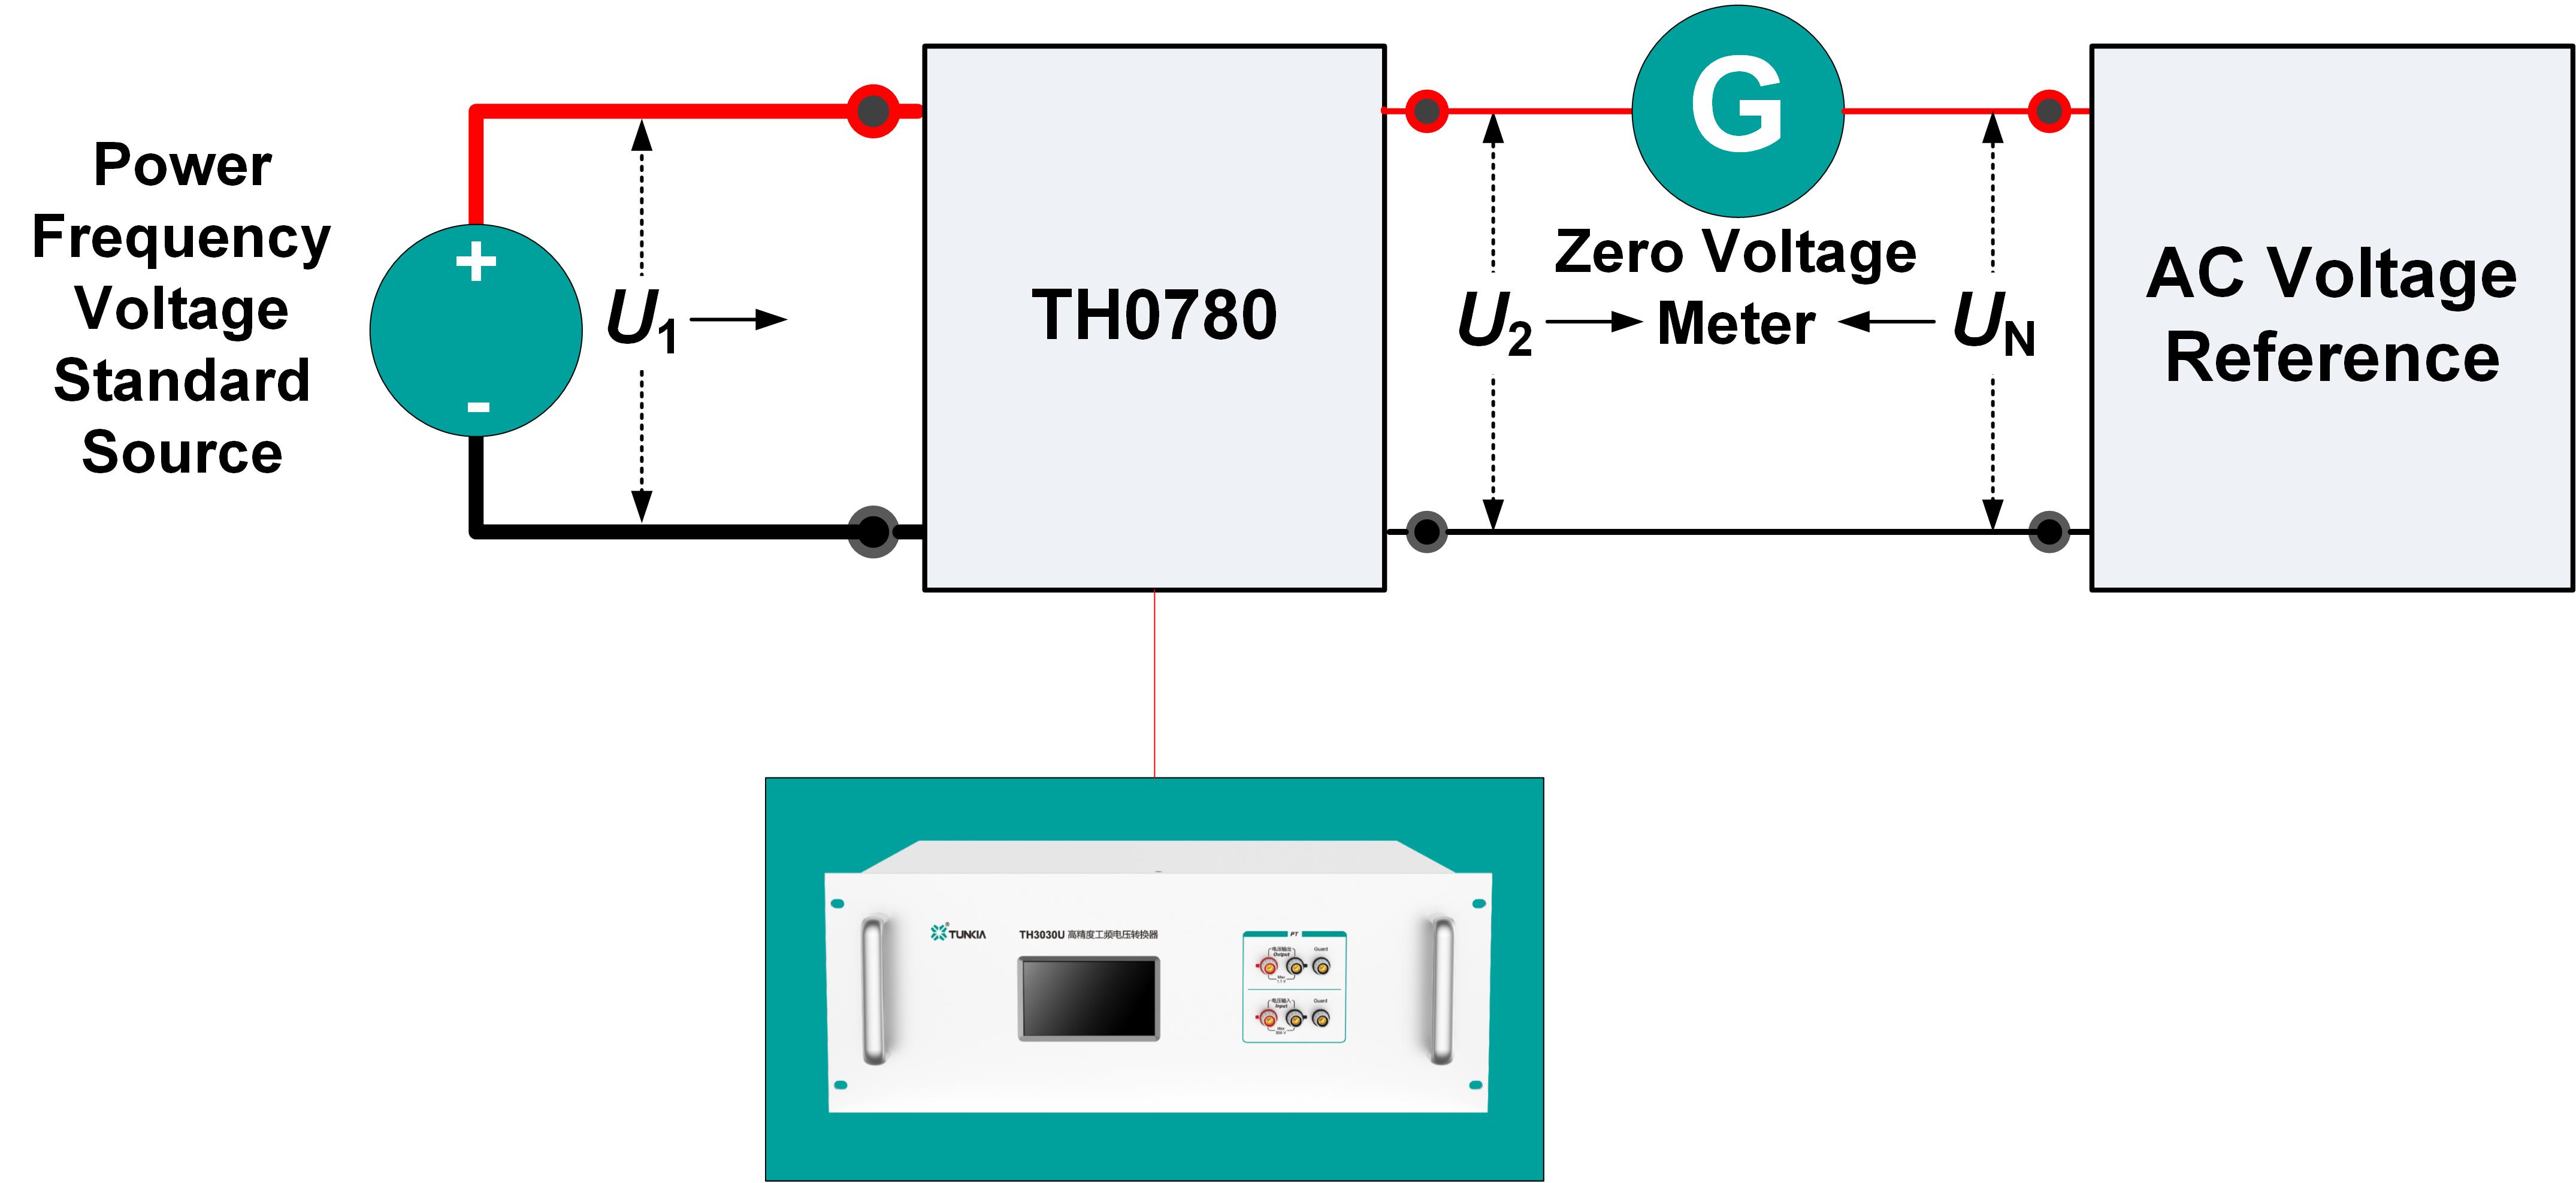 TH0780 Multiplexing VV Selection Units Precise Calibration of Power Frequency Voltage Standard Source